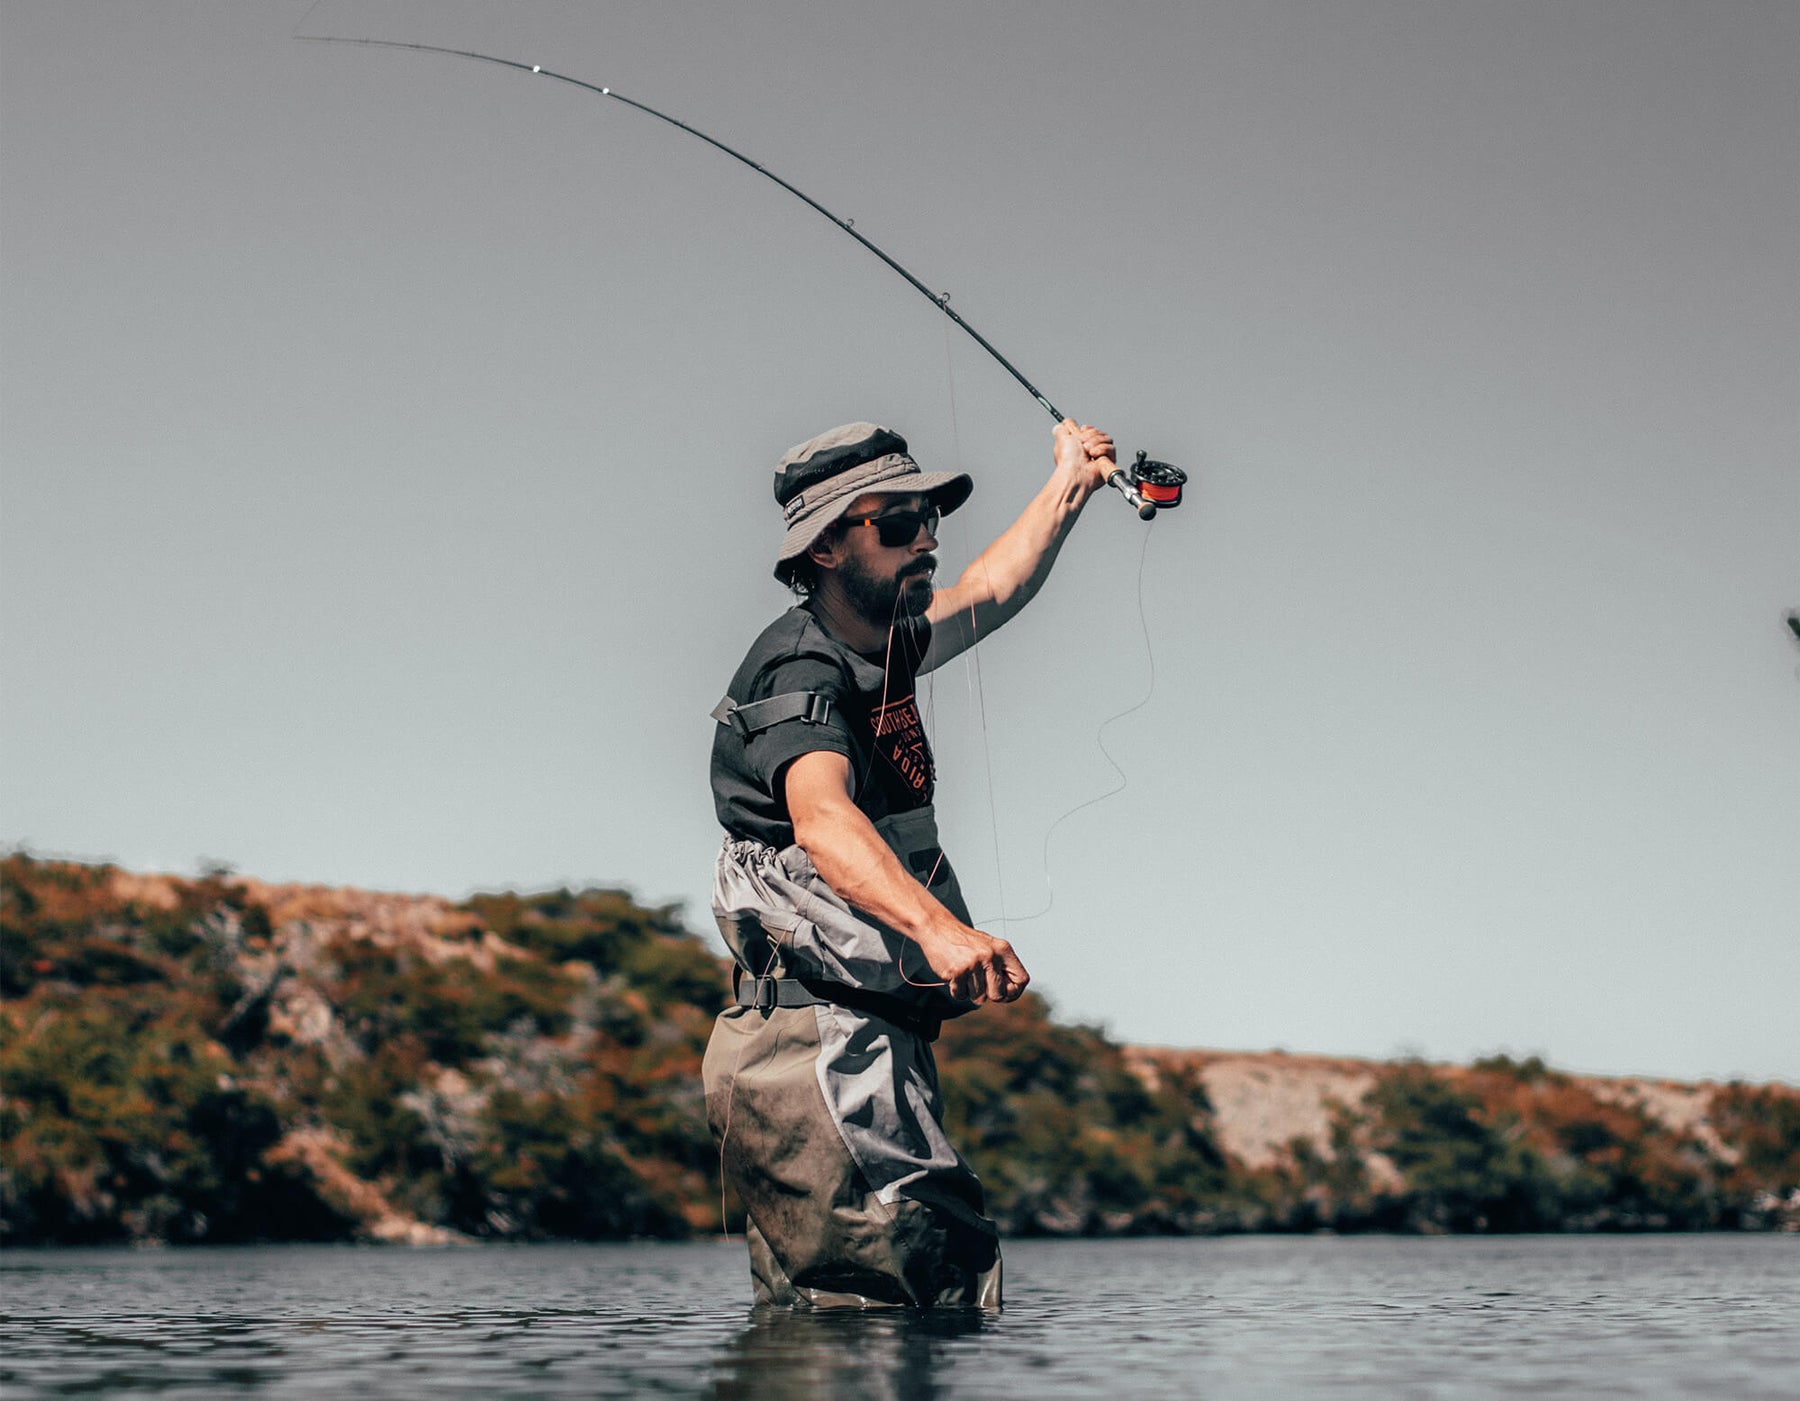 Choosing the right Clothing for Fishing